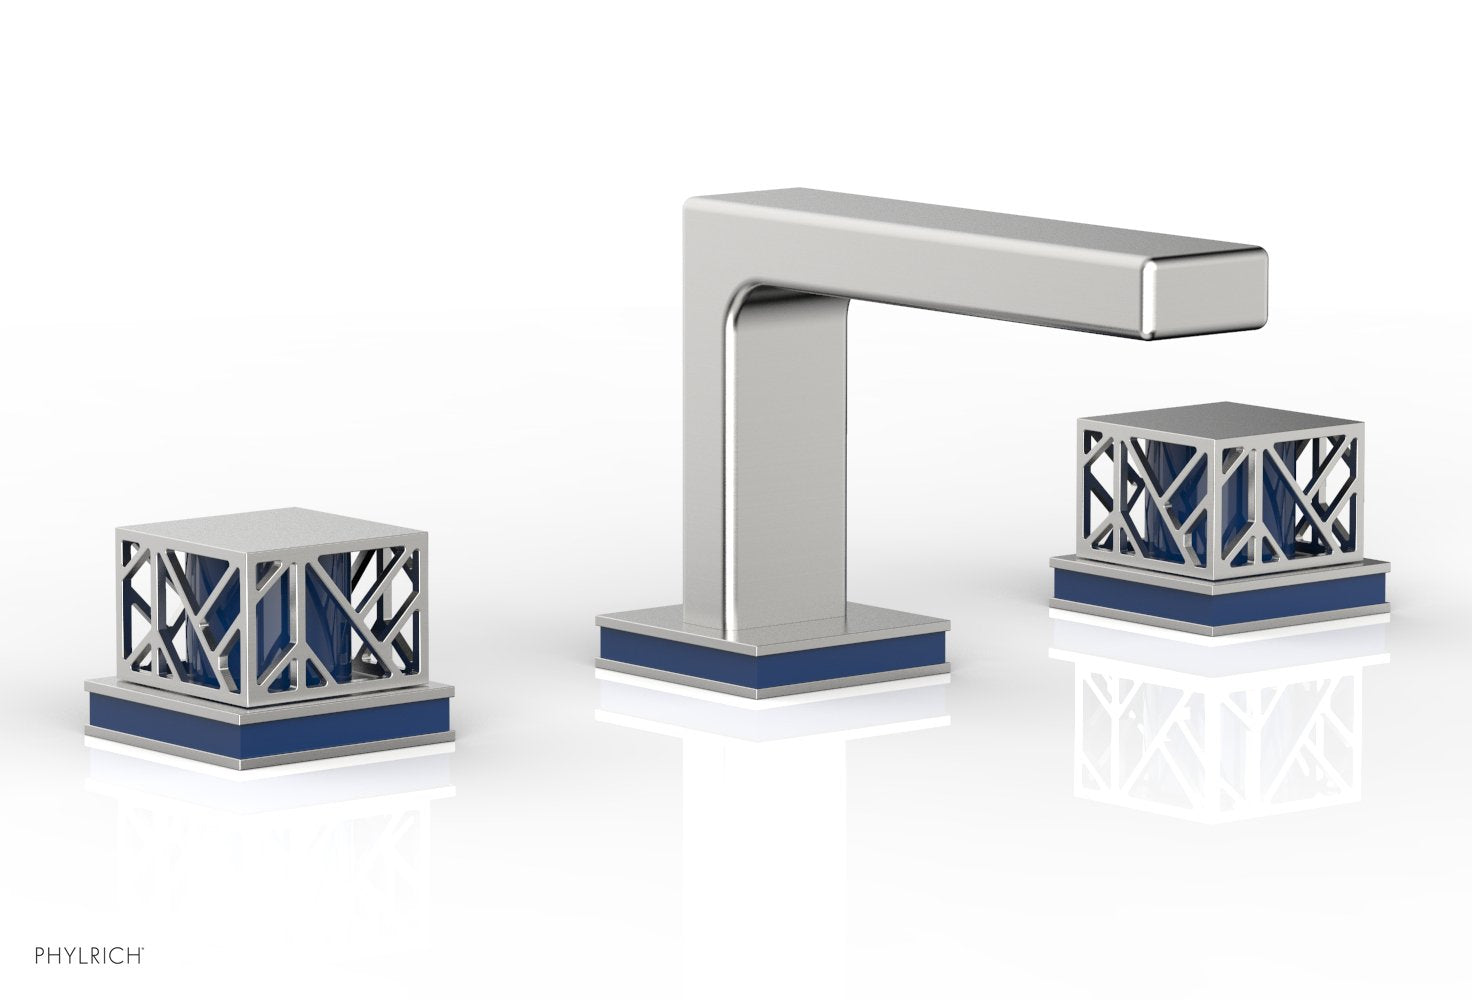 Phylrich JOLIE Widespread Faucet - Square Handles with "Navy Blue" Accents